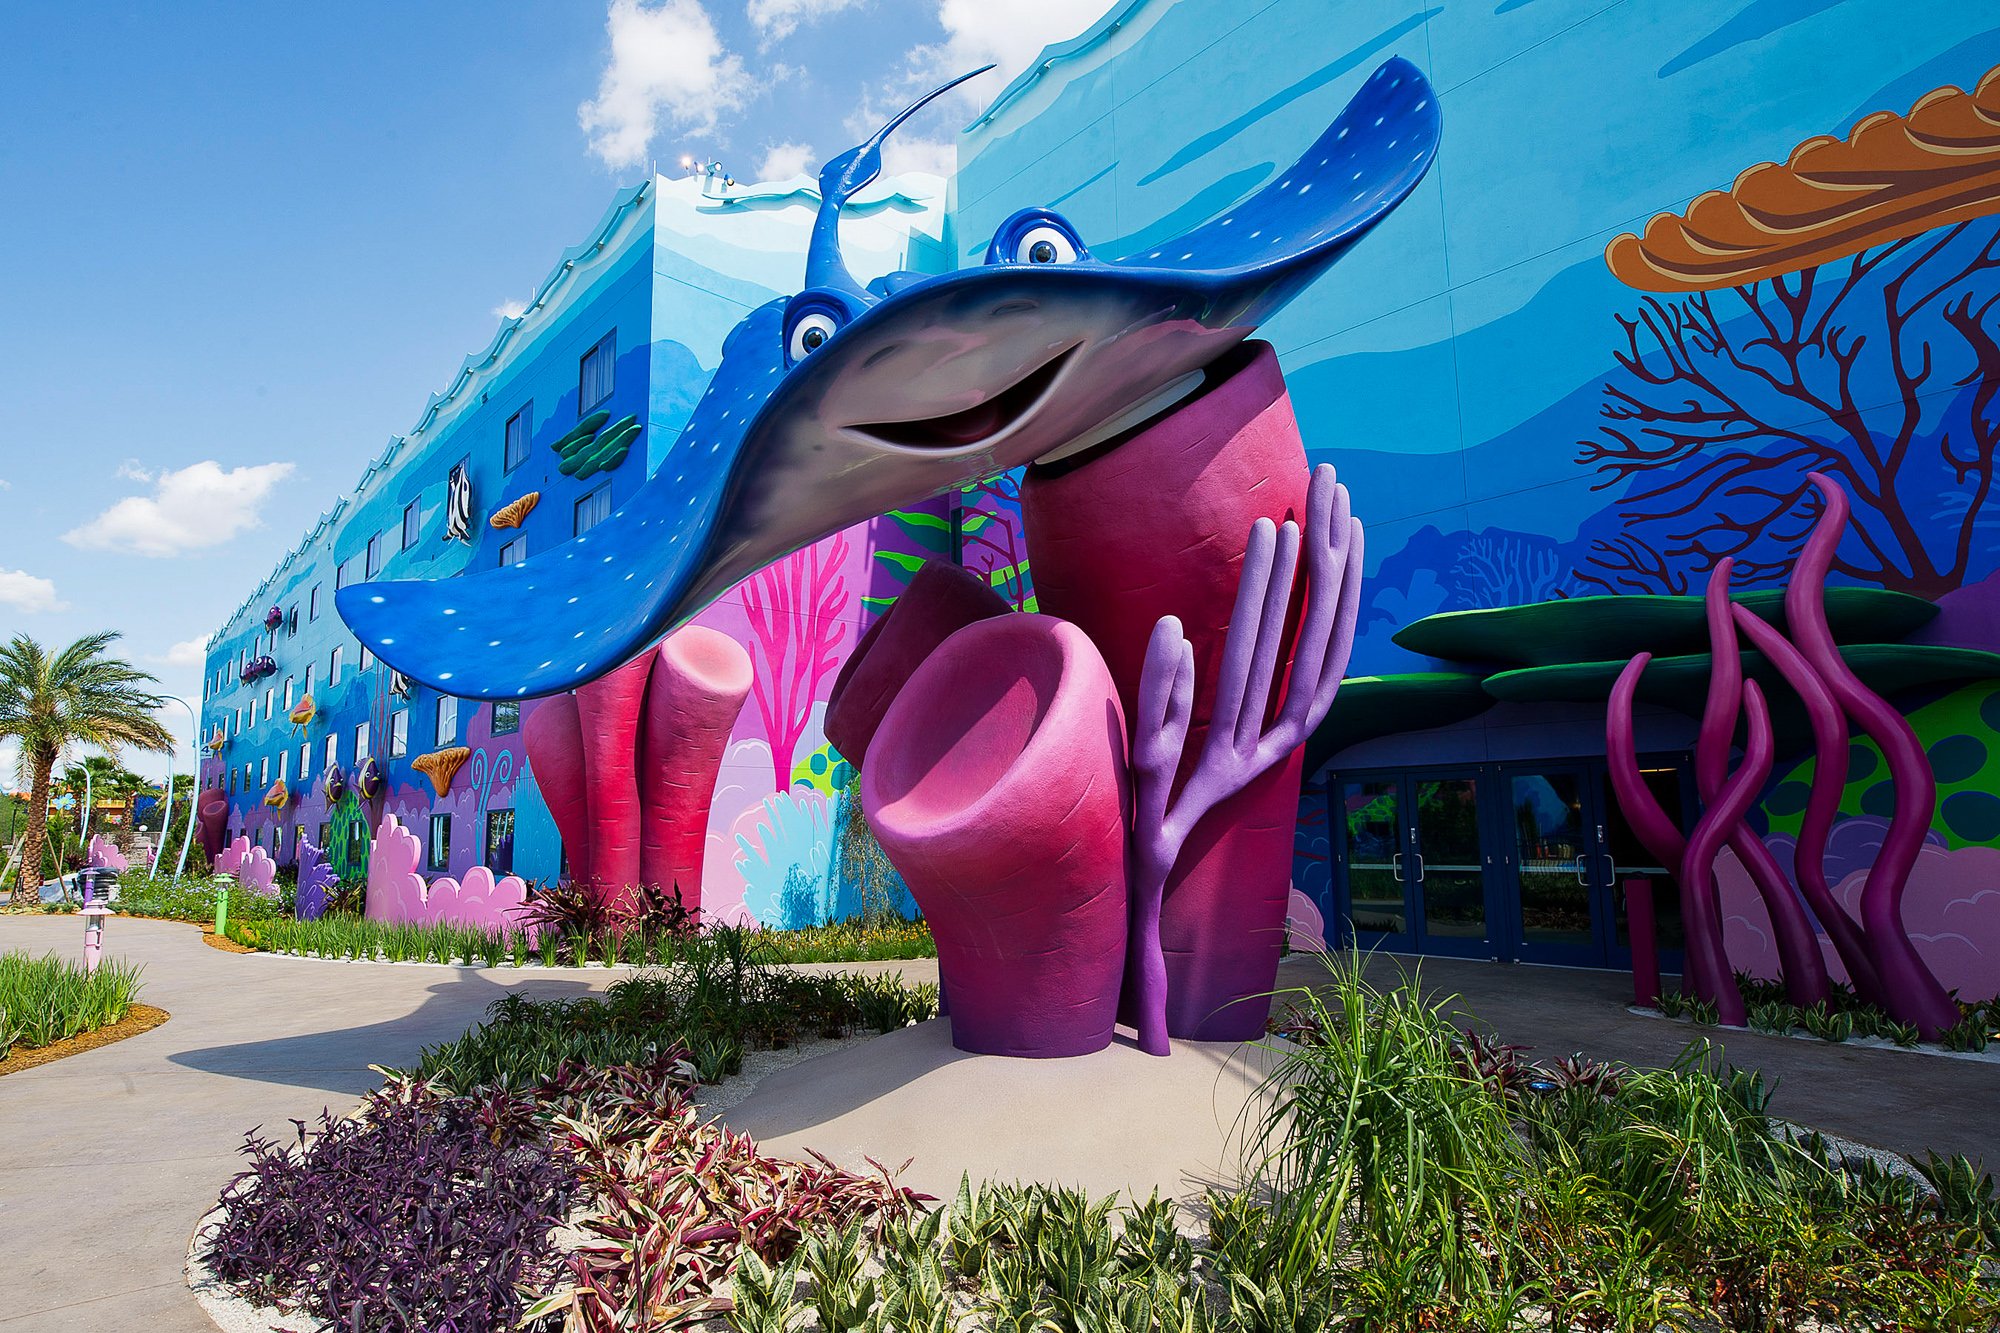 Exterior of the "Finding Nemo" wings at Disney's Art of Animation Resort